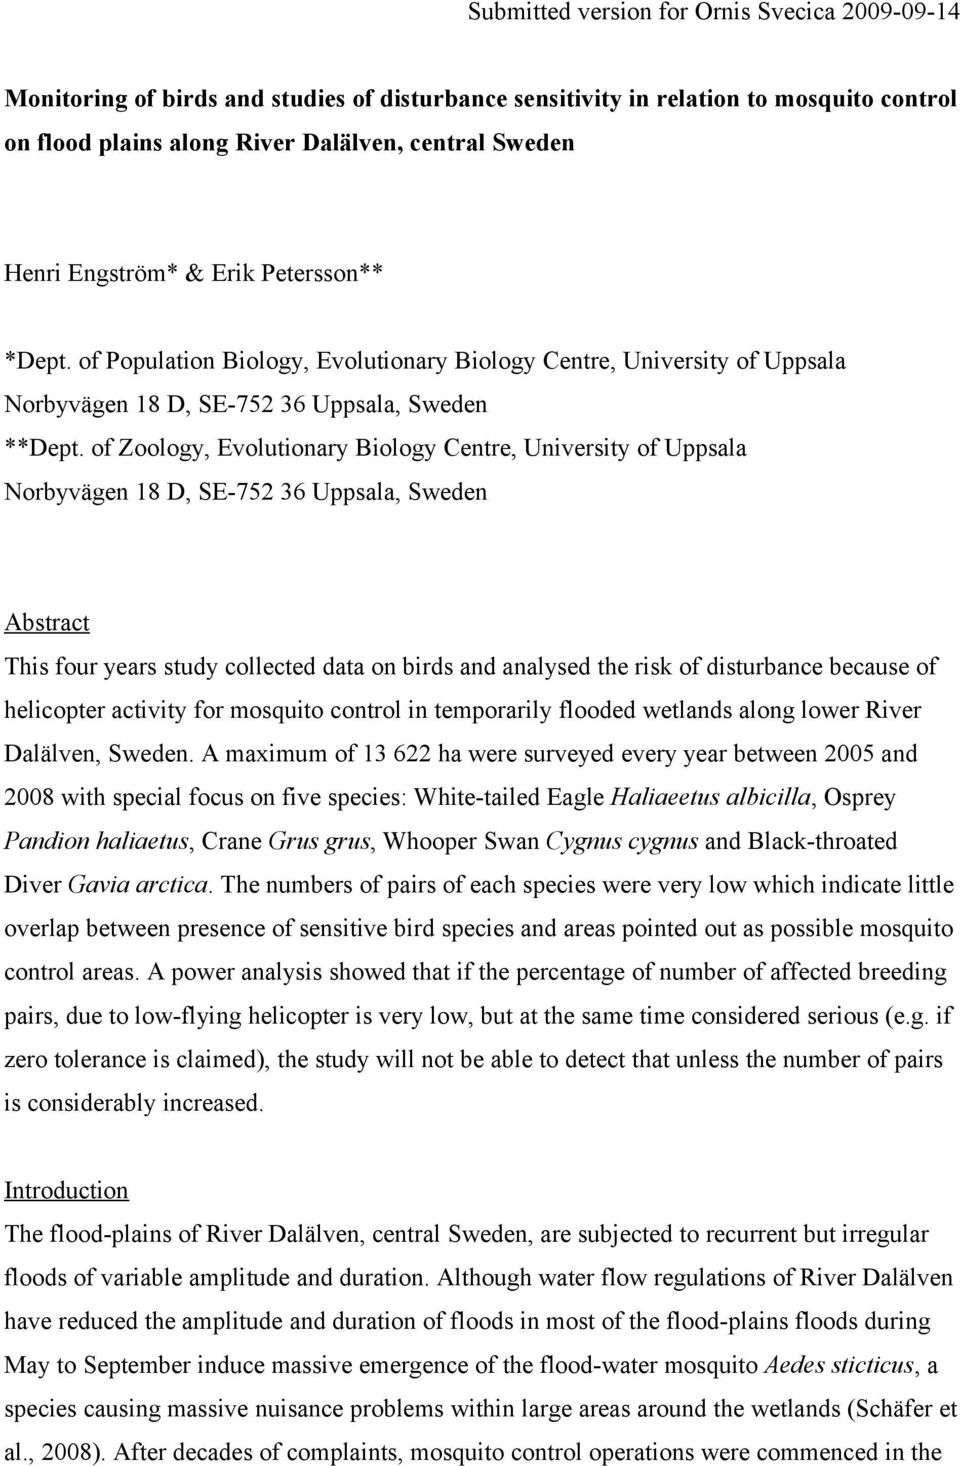 of Zoology, Evolutionary Biology Centre, University of Uppsala Norbyvägen 18 D, SE-752 36 Uppsala, Sweden Abstract This four years study collected data on birds and analysed the risk of disturbance